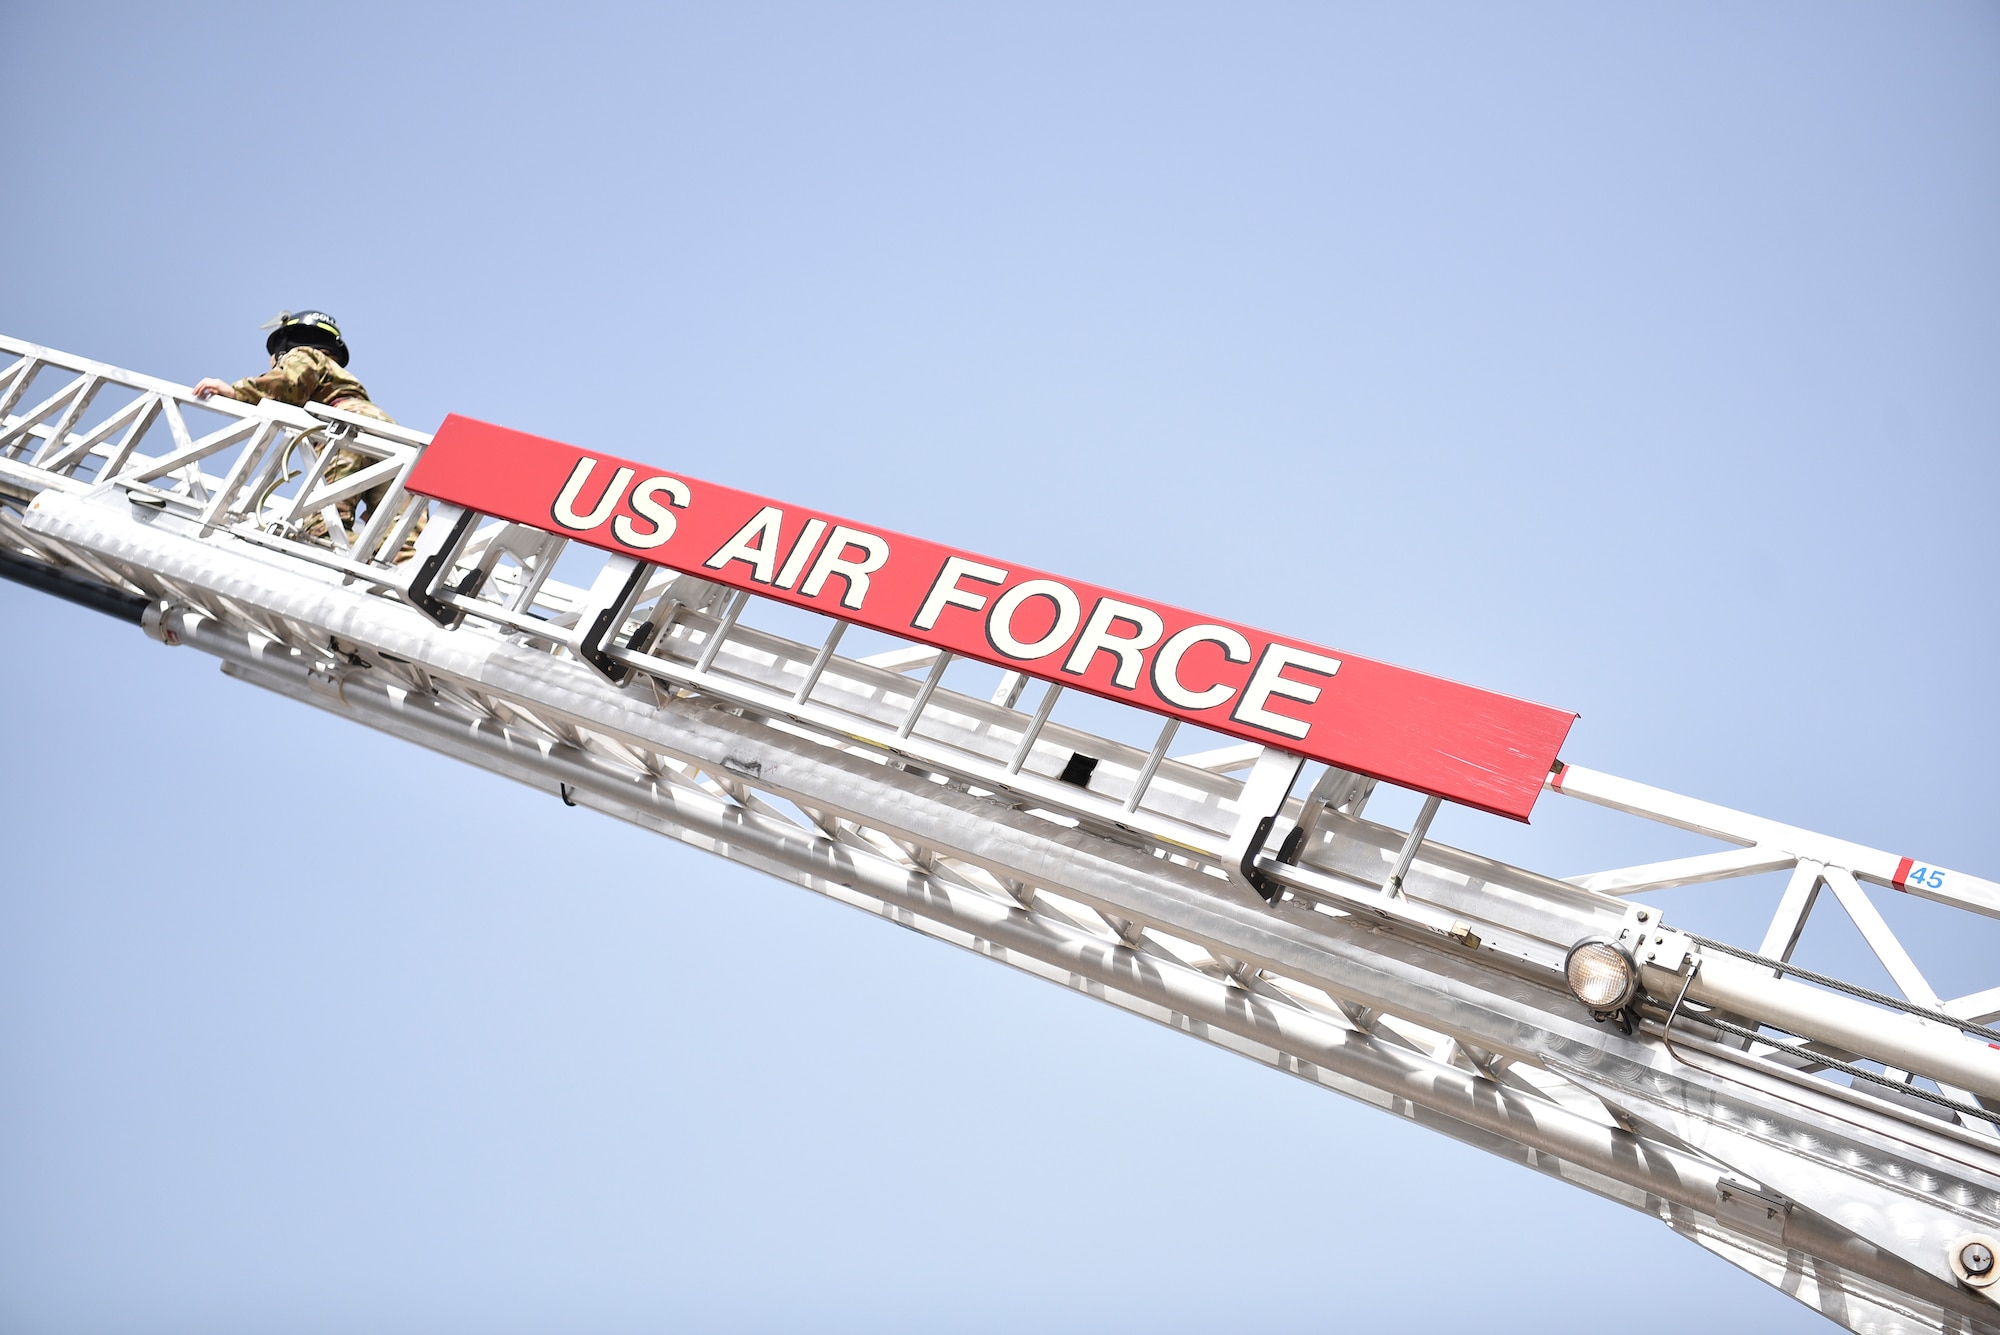 U.S. Air Force Staff Sgt. Journey Collier, a 35th Civil Engineer Squadron firefighter, climbs a fire truck ladder at Misawa Air Base, Japan, March 31, 2021. Collier recently won the Air Force Military Firefighter of the Year award, and credits teamwork as the reason for her success. (U.S. Air Force photo by Airman 1st Class Joao Marcus Costa)